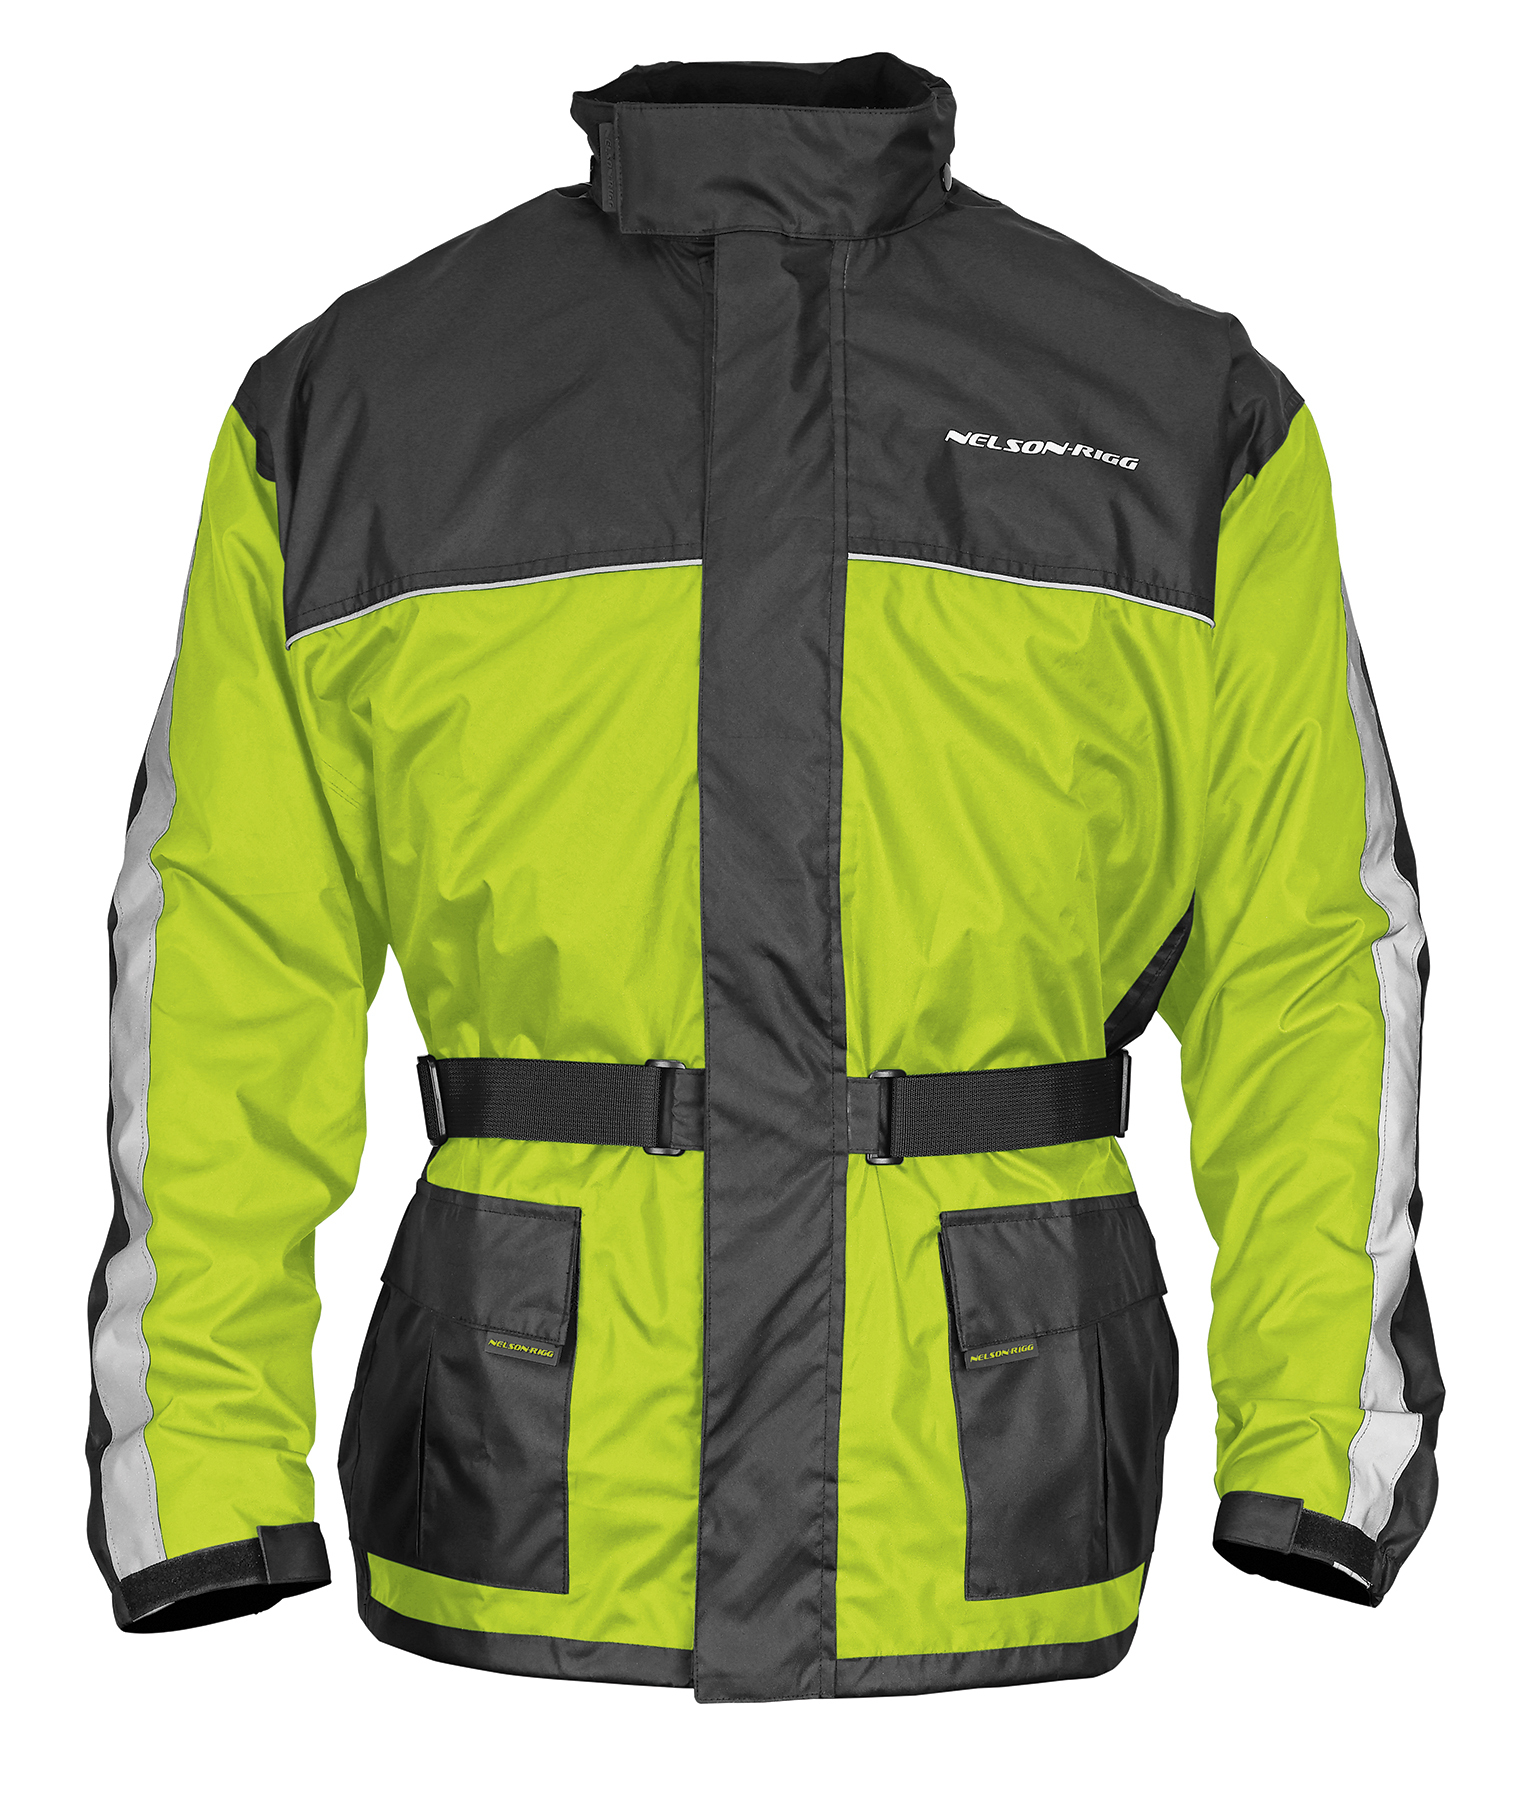 Nelson-rigg - Solo Storm Jacket - 718943000352